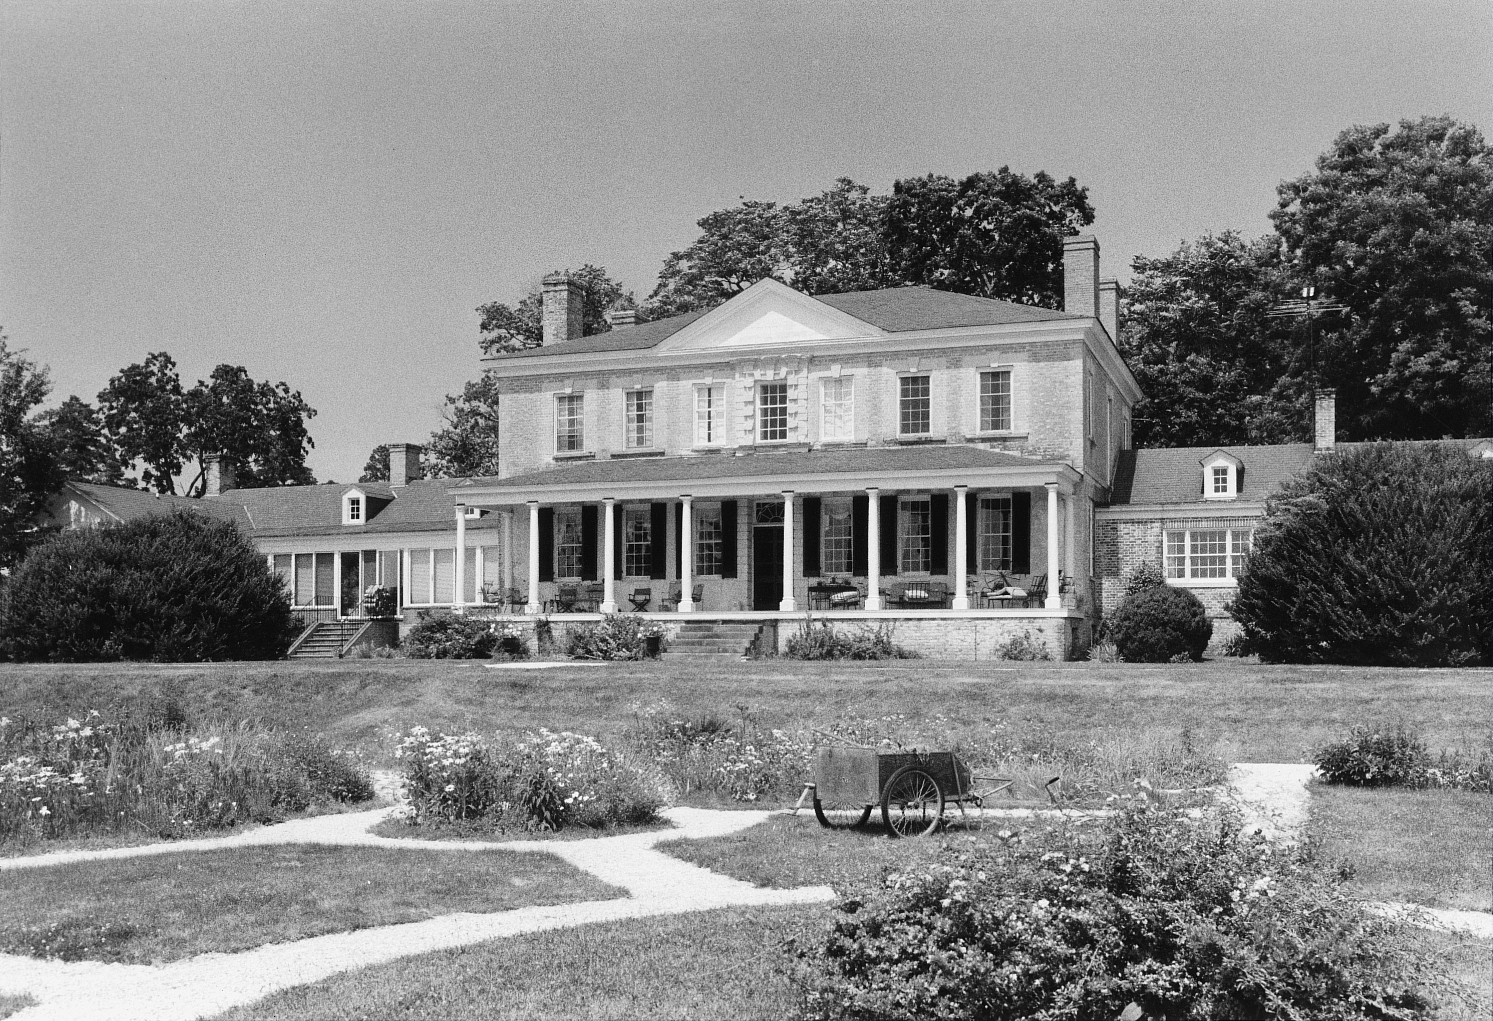 Rear (south) elevation and gardens. Photo credit: Calder Loth/DHR, 1992